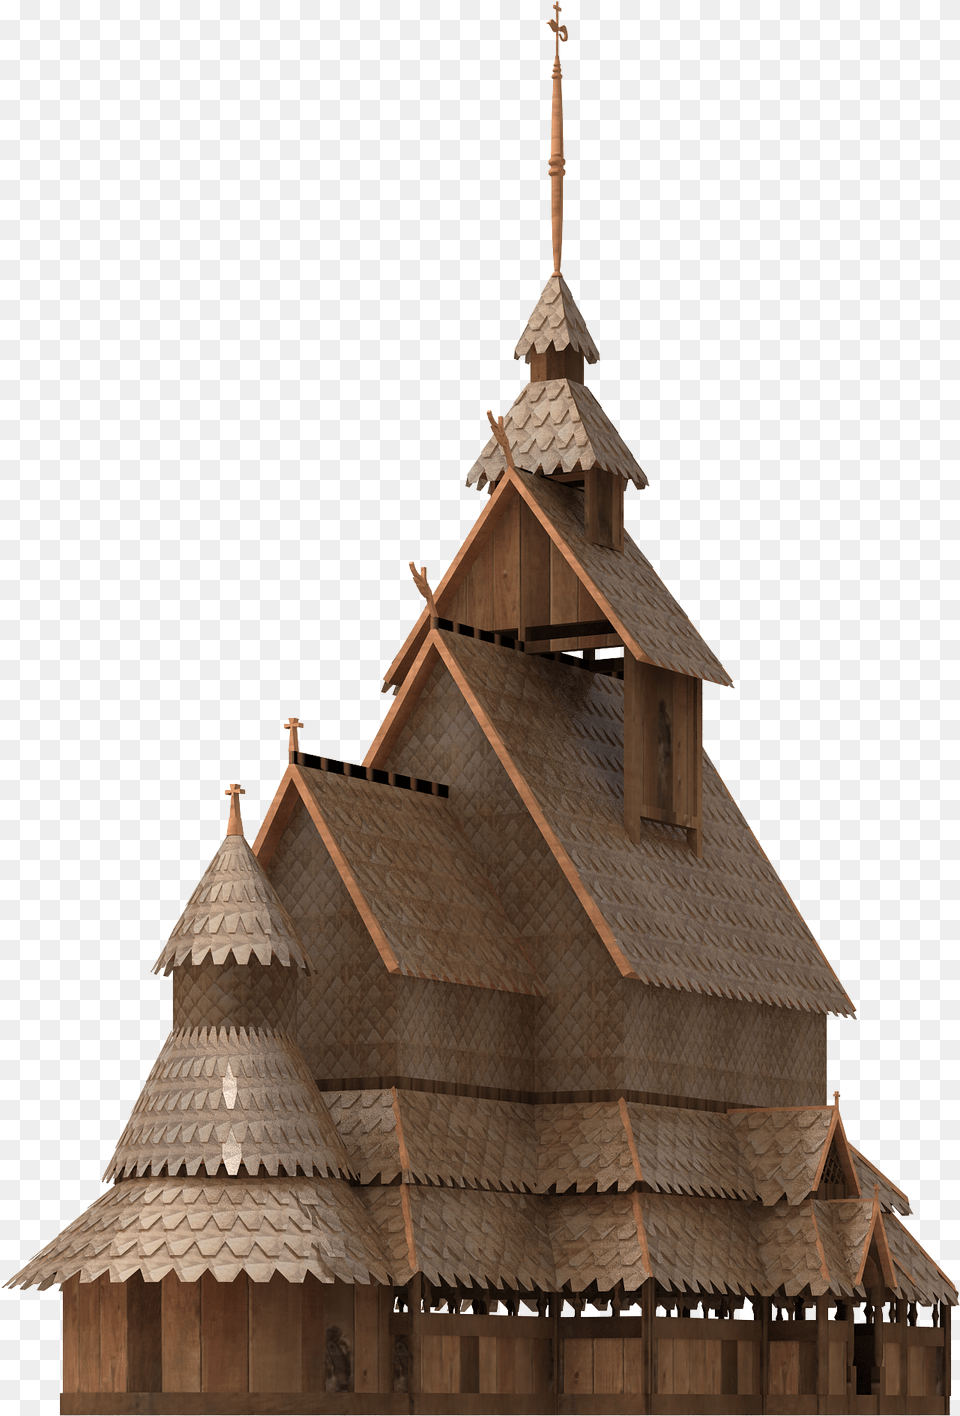 Borgund Stave Church Altar, Architecture, Building, Spire, Tower Png Image